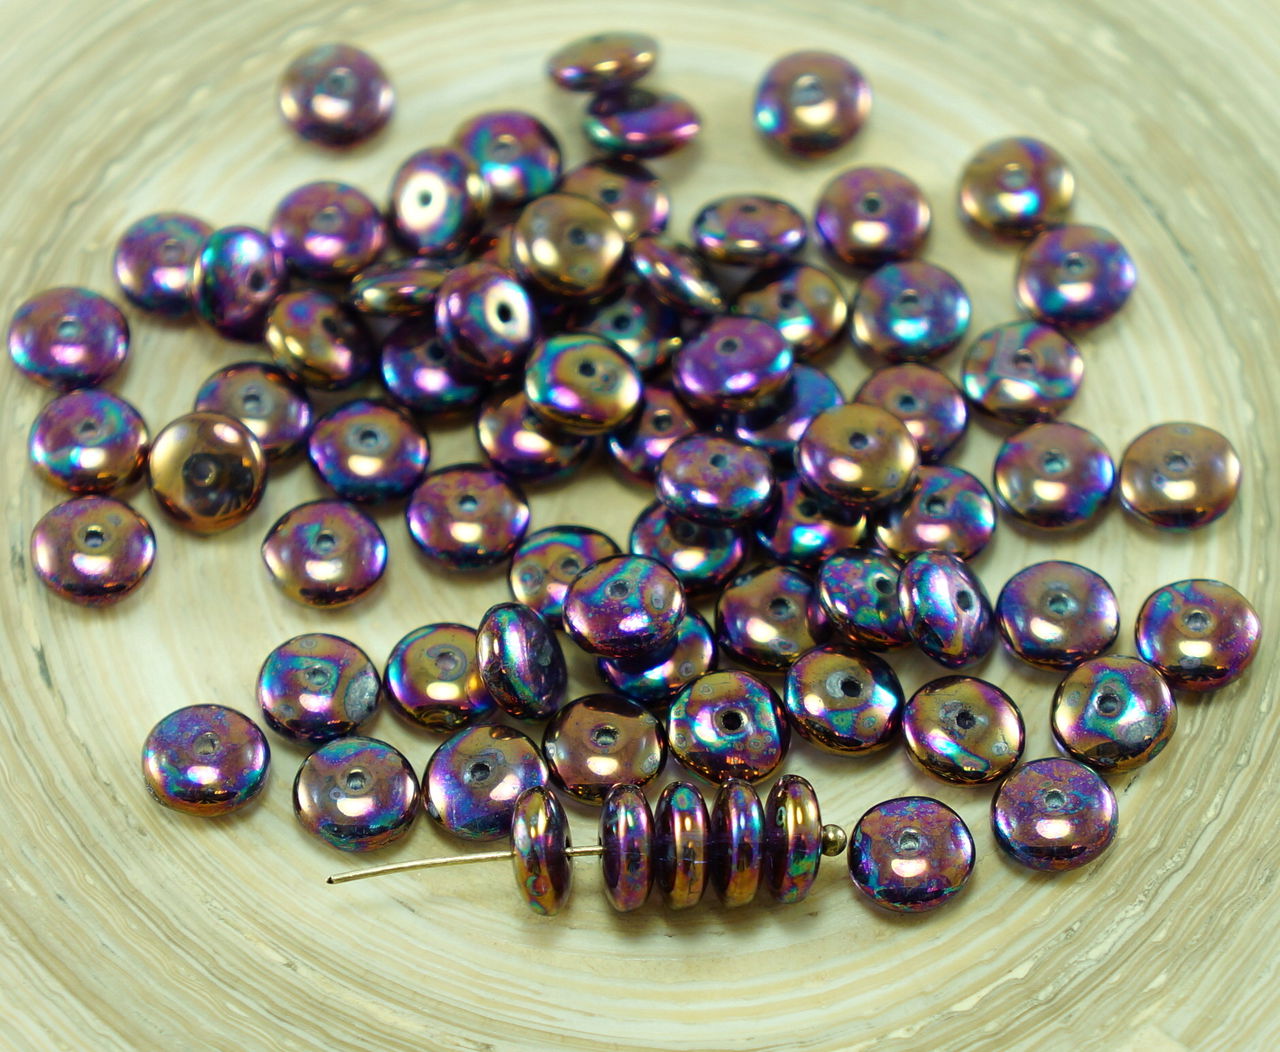 60pcs Czech Glass Disc Beads Solo Flat Disk Spacer One Hole 6mm | eBay